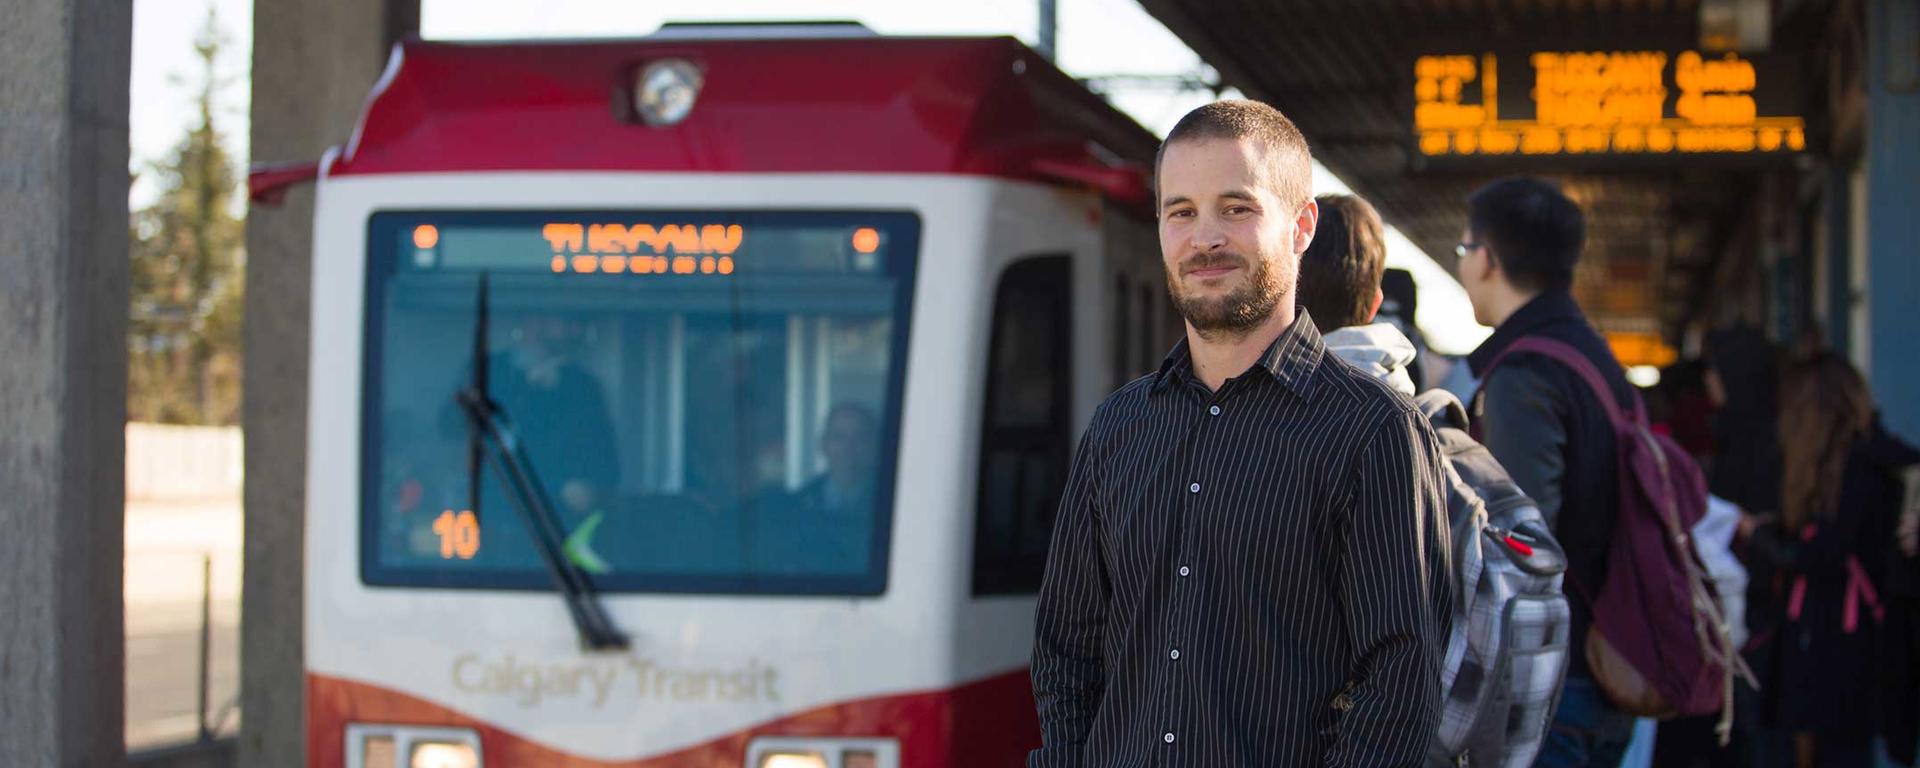 UCalgary Geography Graduate Student Mark Pfeifer stands on the platform at the University train station